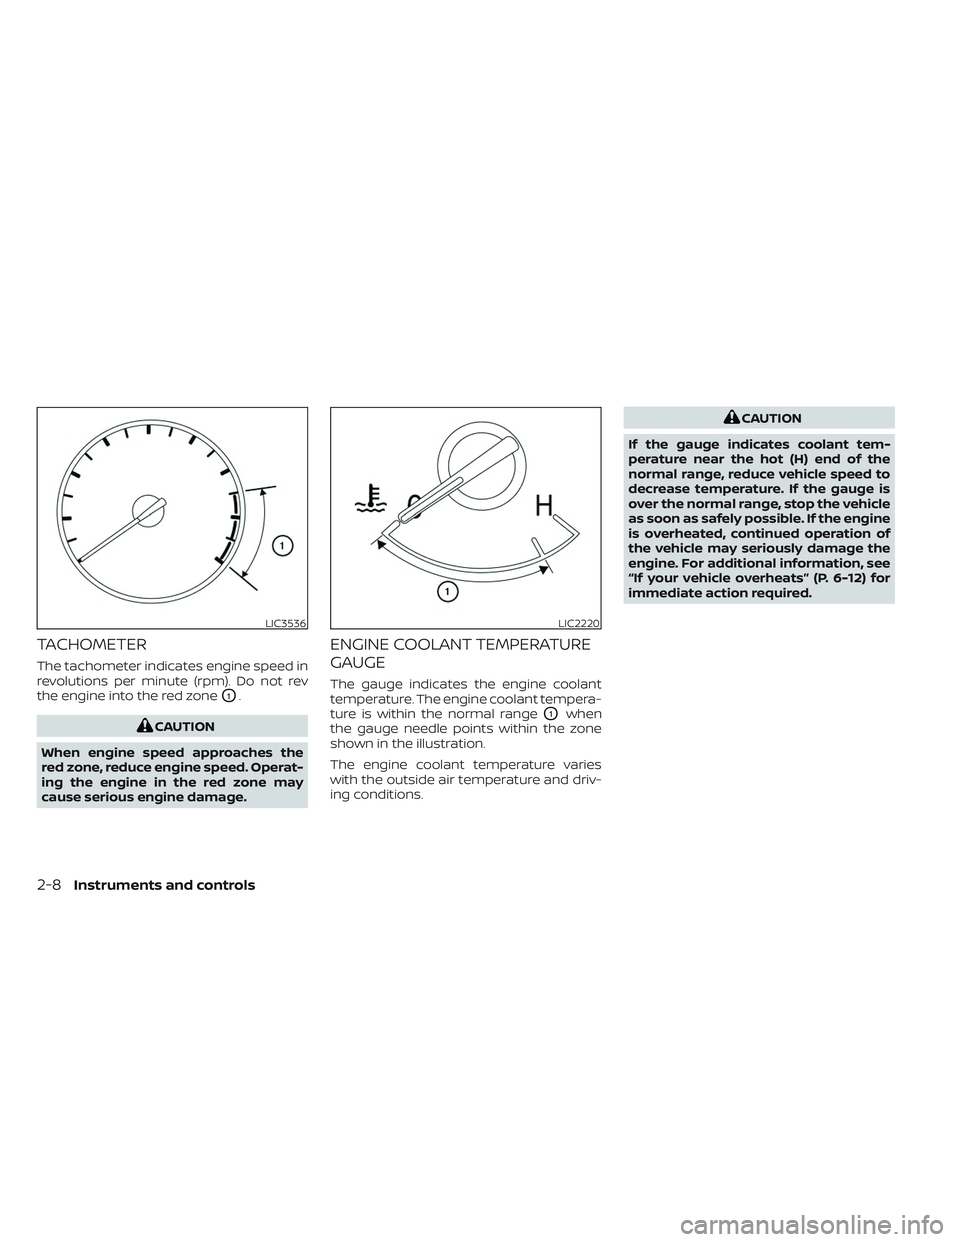 NISSAN TITAN 2022  Owners Manual TACHOMETER
The tachometer indicates engine speed in
revolutions per minute (rpm). Do not rev
the engine into the red zone
O1.
CAUTION
When engine speed approaches the
red zone, reduce engine speed. Op